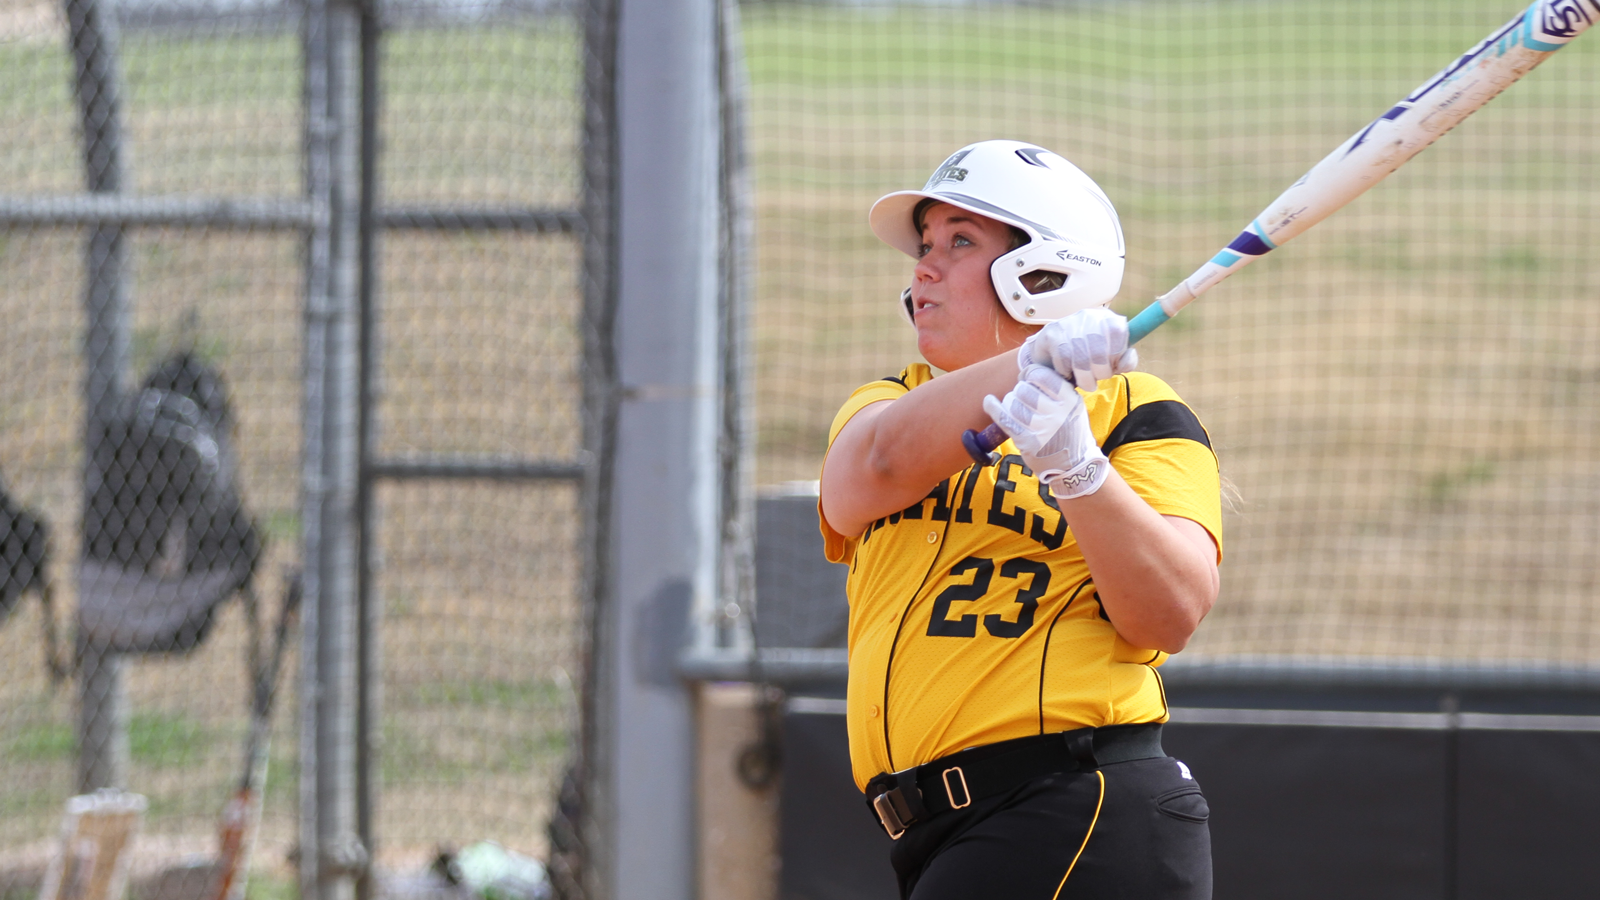 Softball completes sweep in dramatic fashion to extend win streak